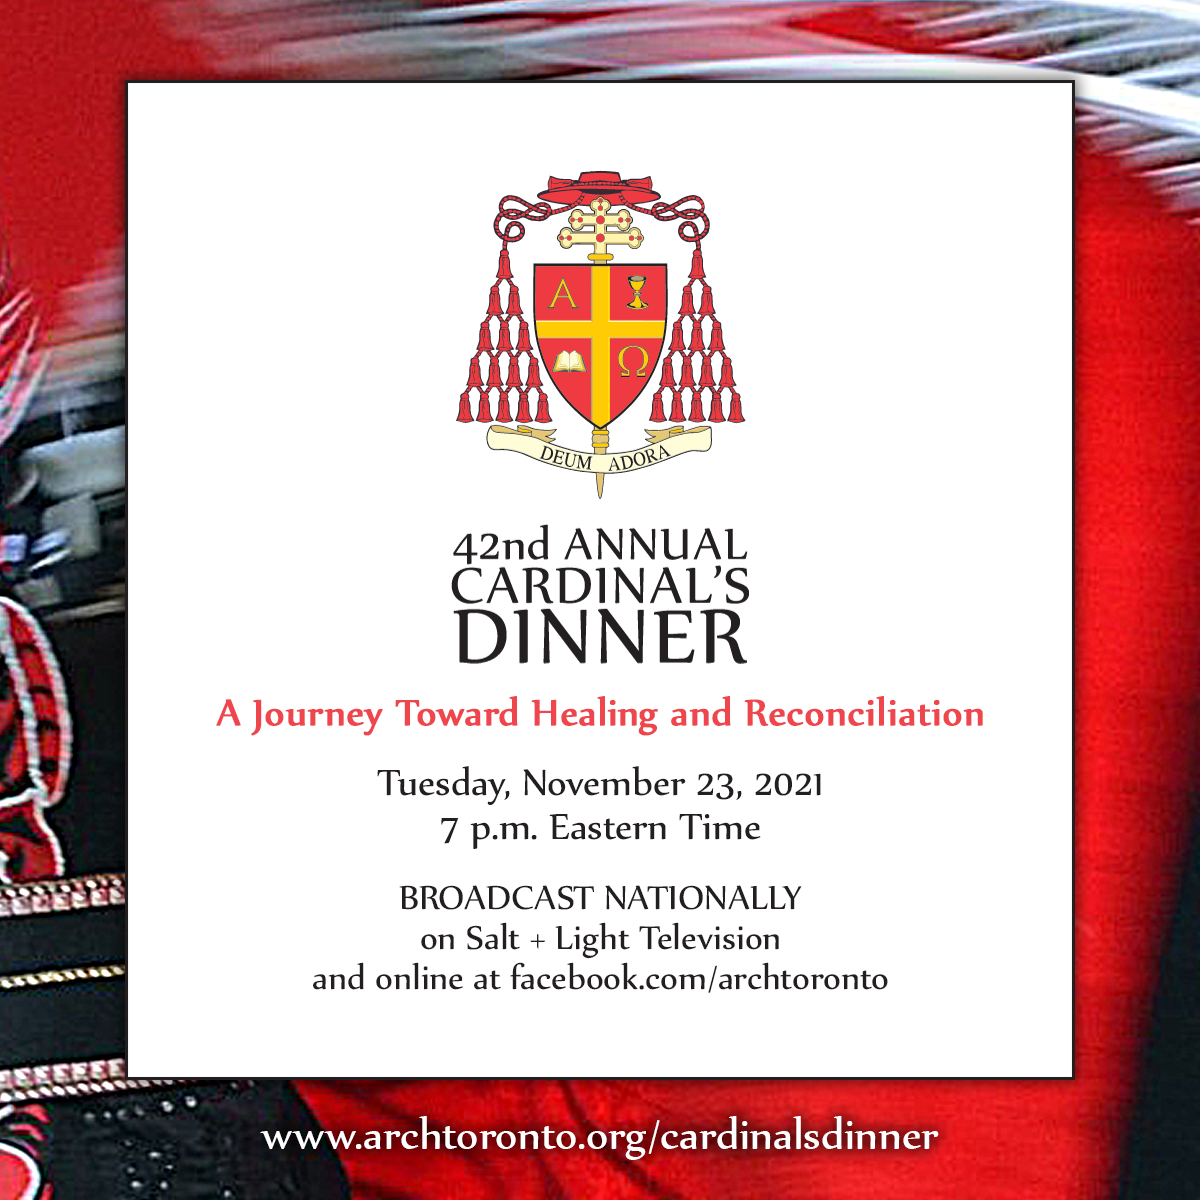 A promo for the 42nd annual Cardinal's Dinner, happening on Tuesday, November 23 at 7 p.m.